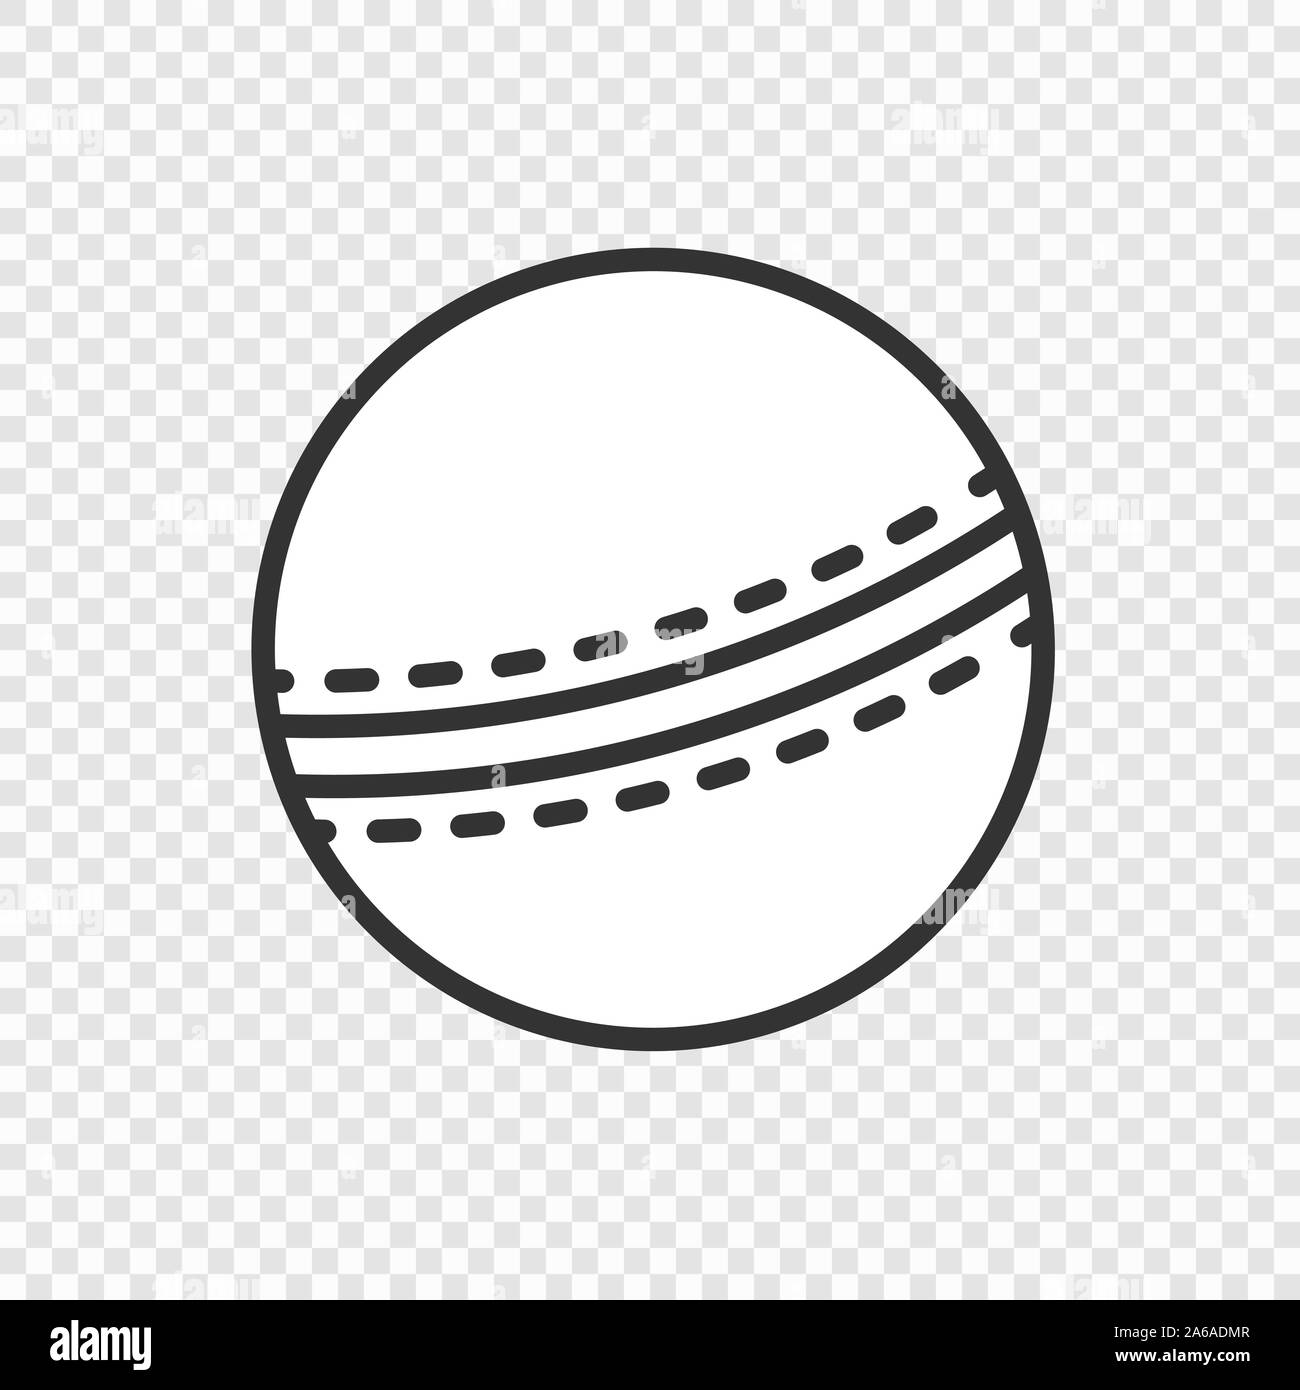 Cricket  ball icon icolated on transparent background, vector illustration Stock Vector